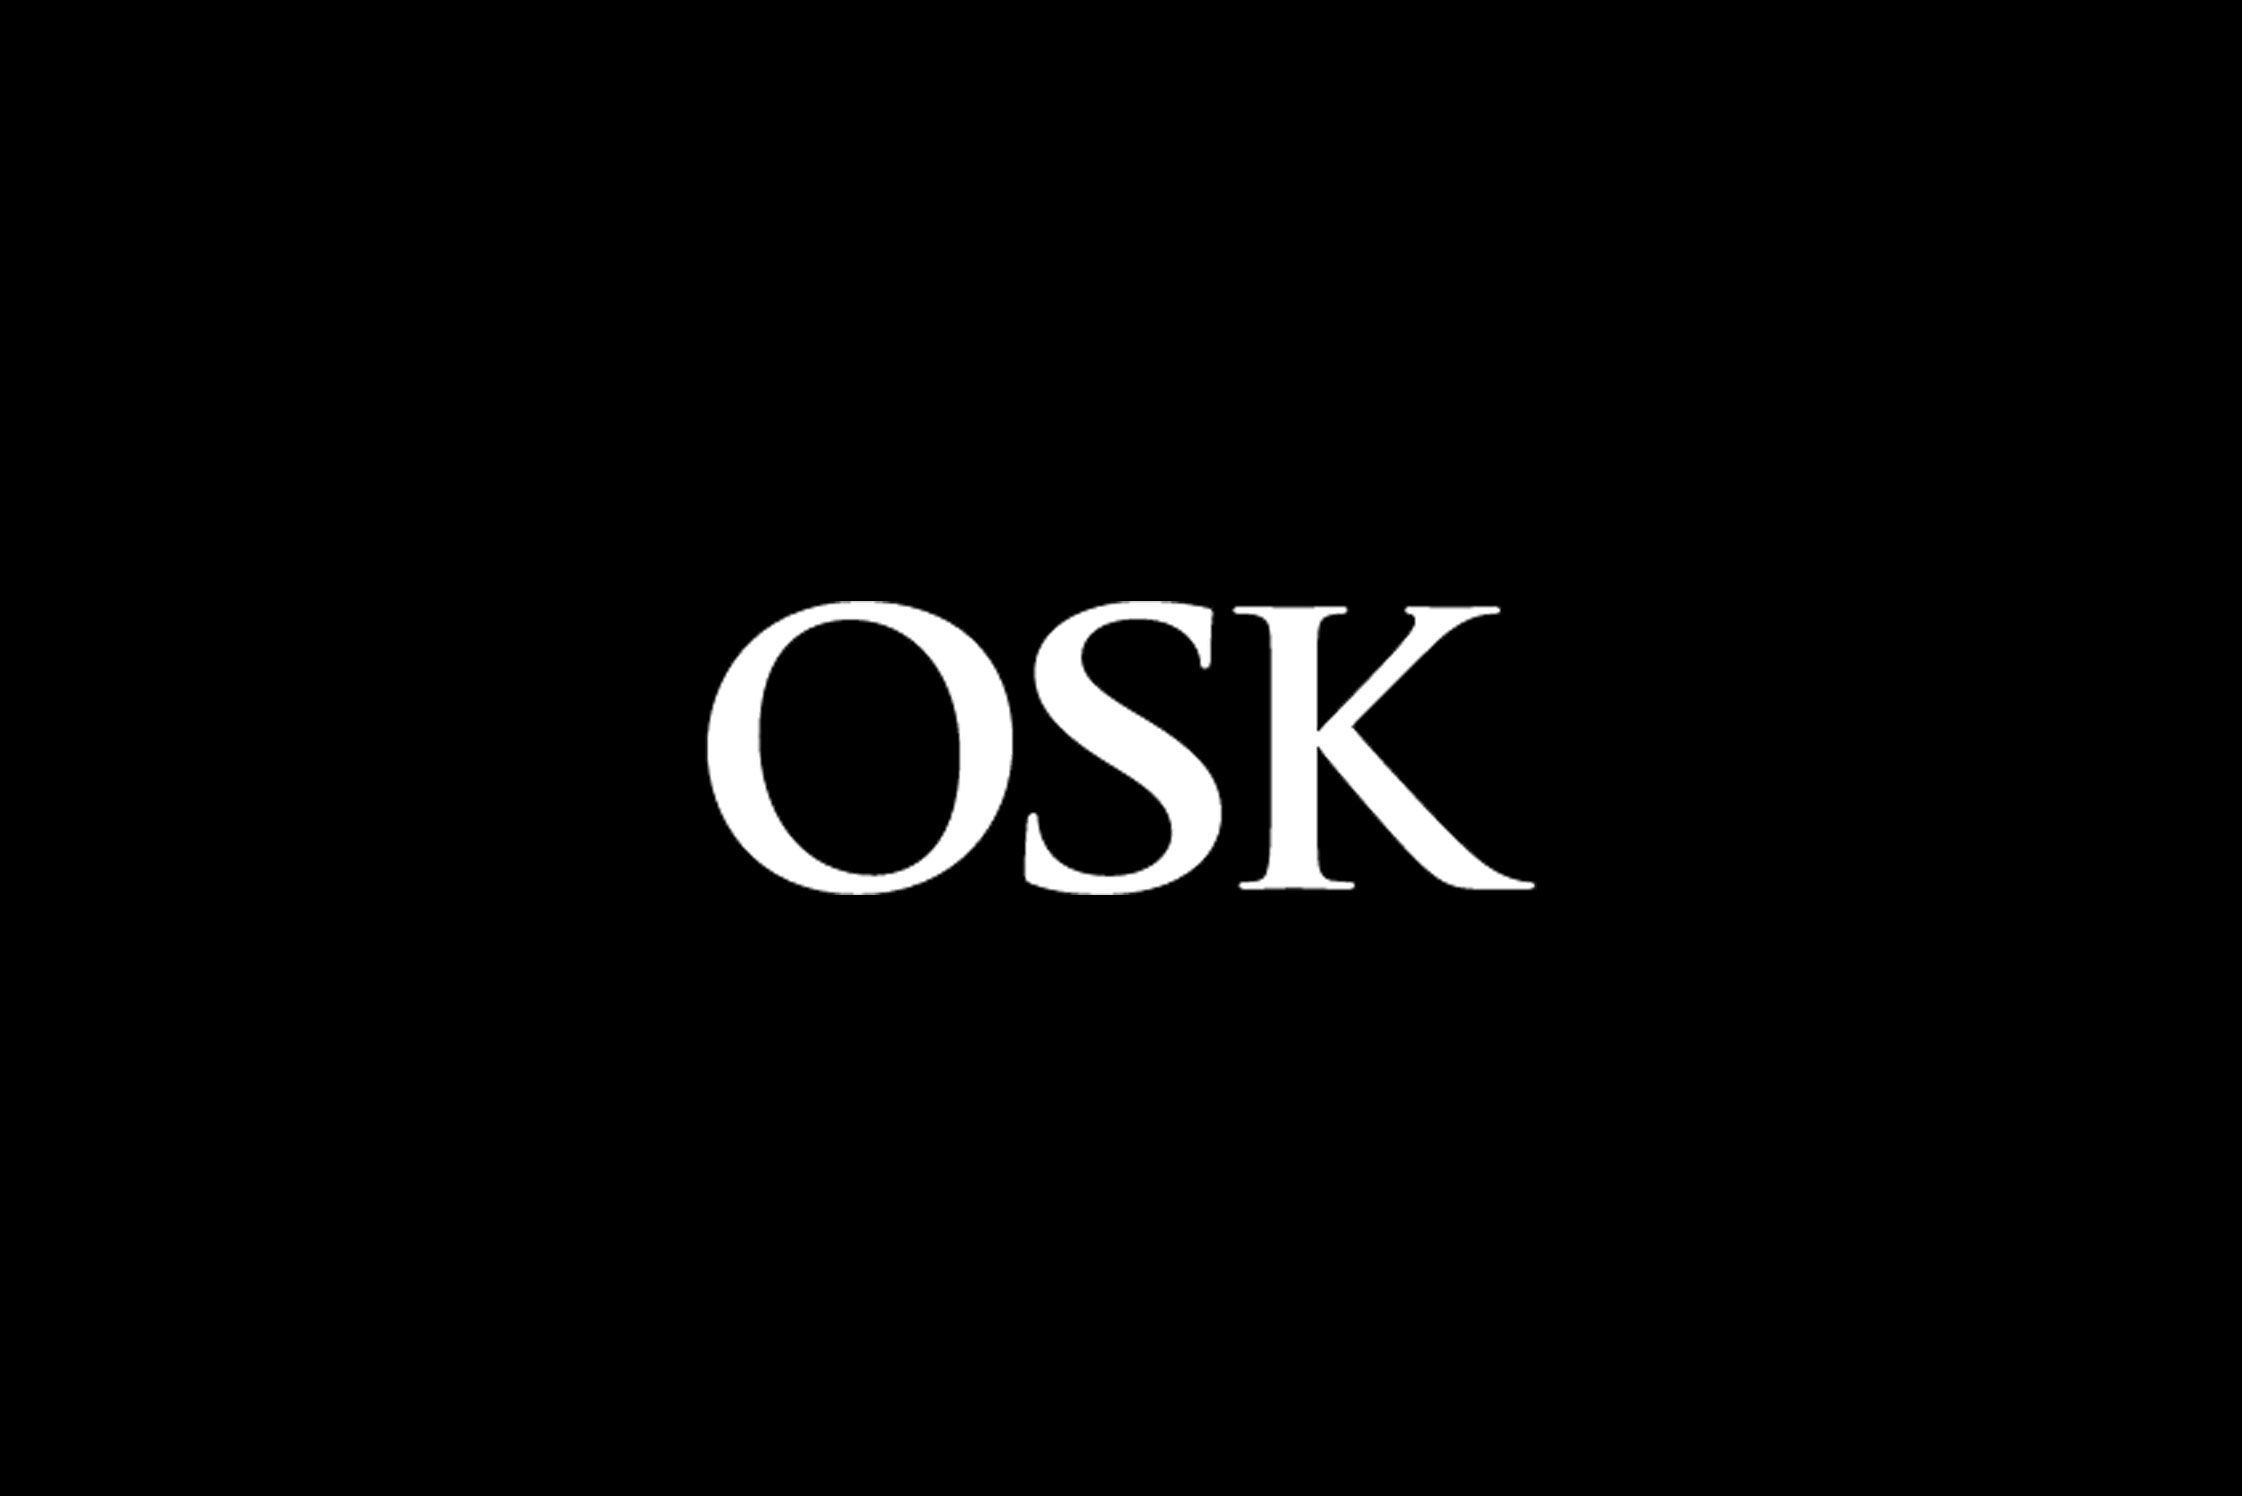 OSK Productions - How To Perform Anal Sex